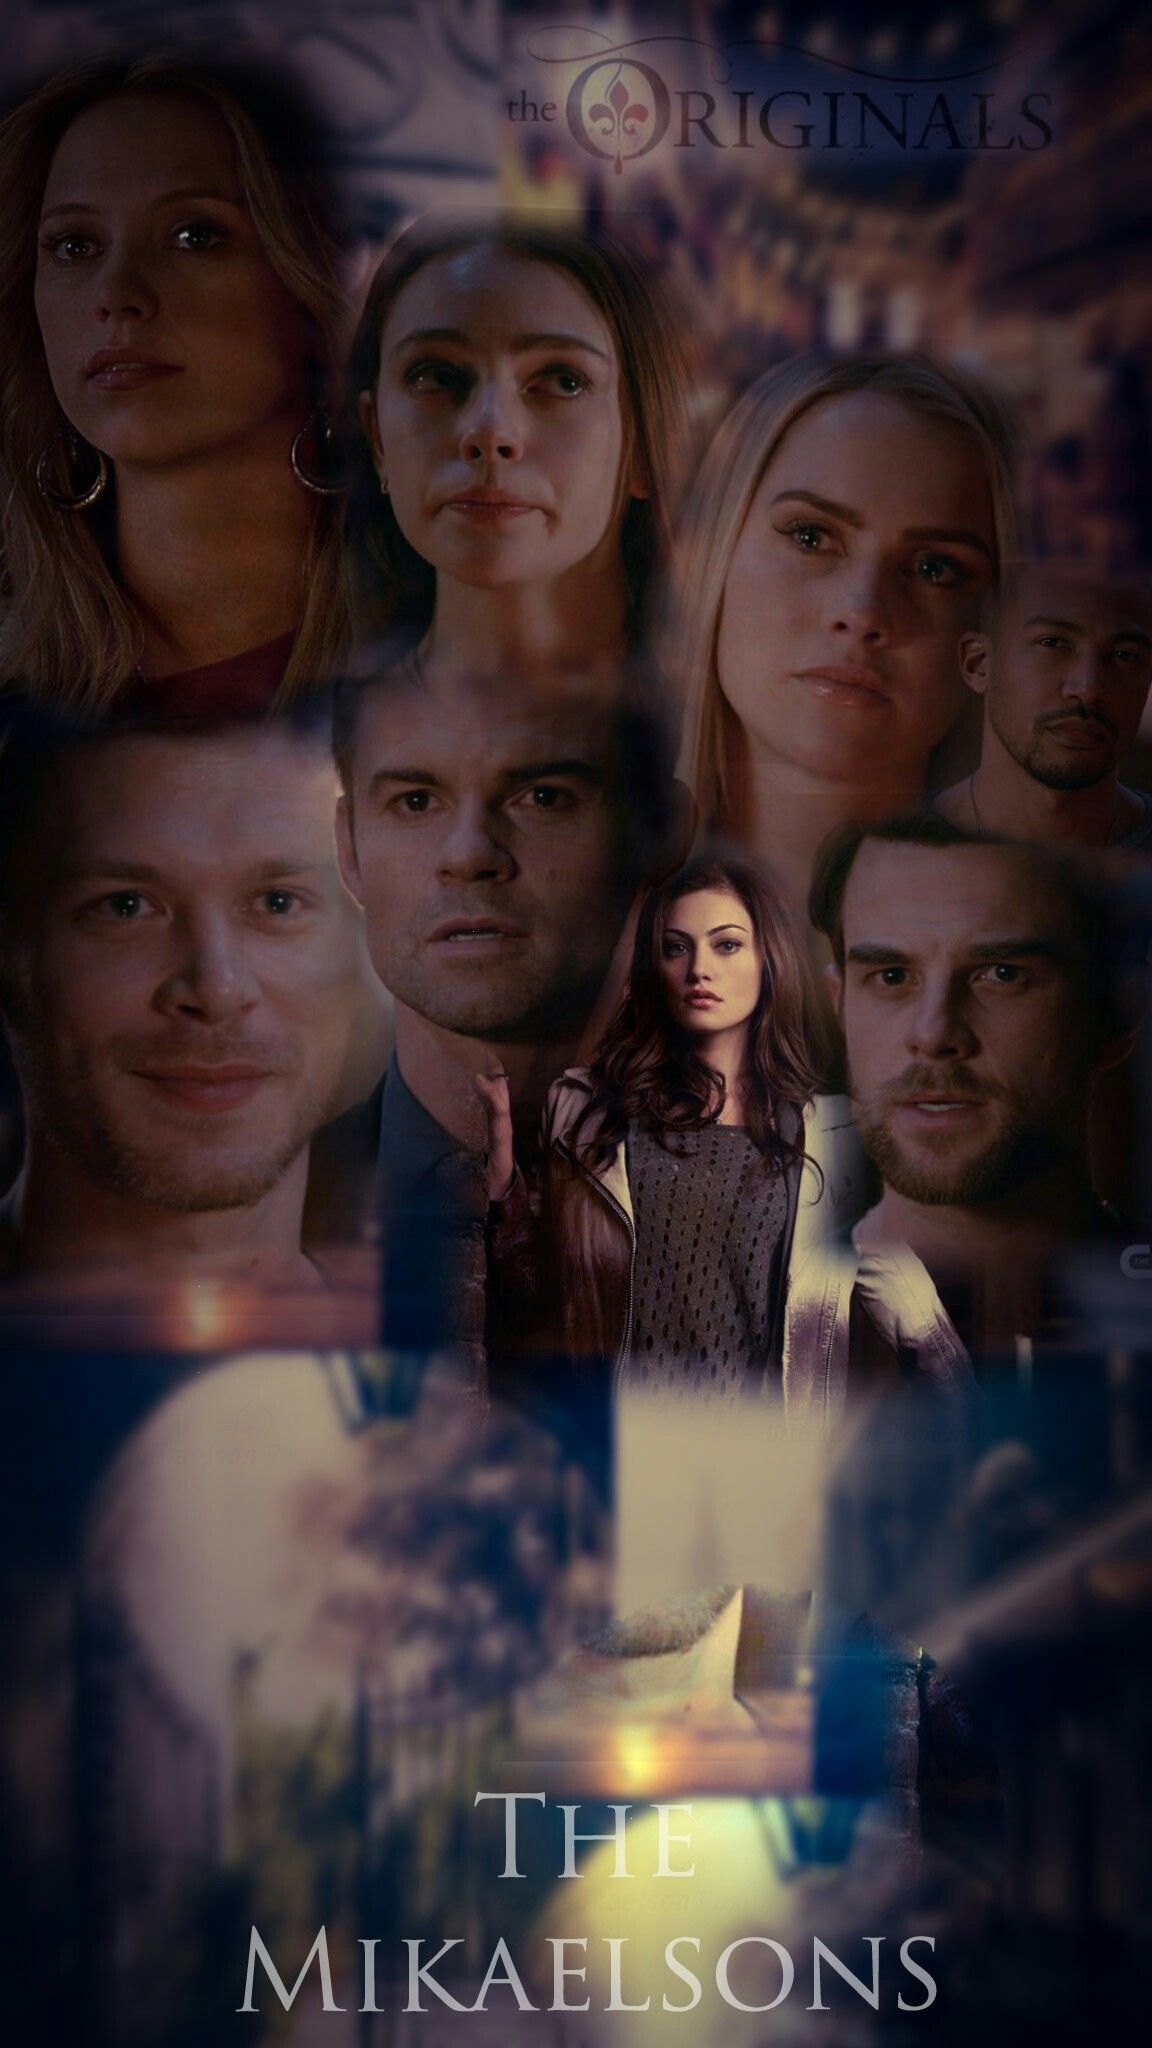 Mikaelson Family edit #themikaelsons #klausmikaelson #theoriginals. Vampire diaries wallpaper, The originals, The originals tv